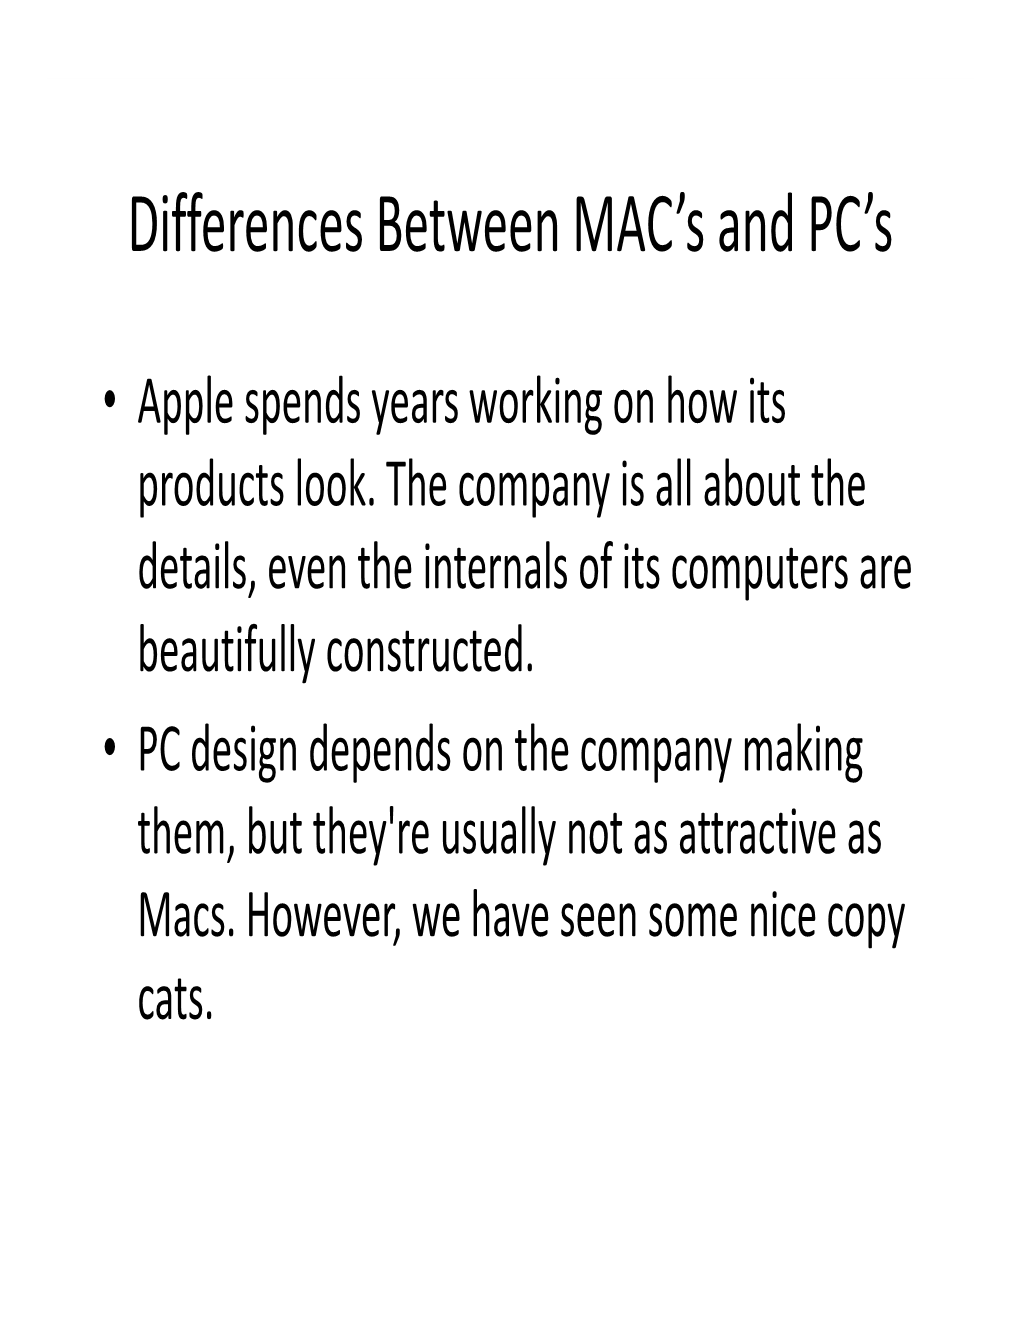 Differences Between MAC's and PC's